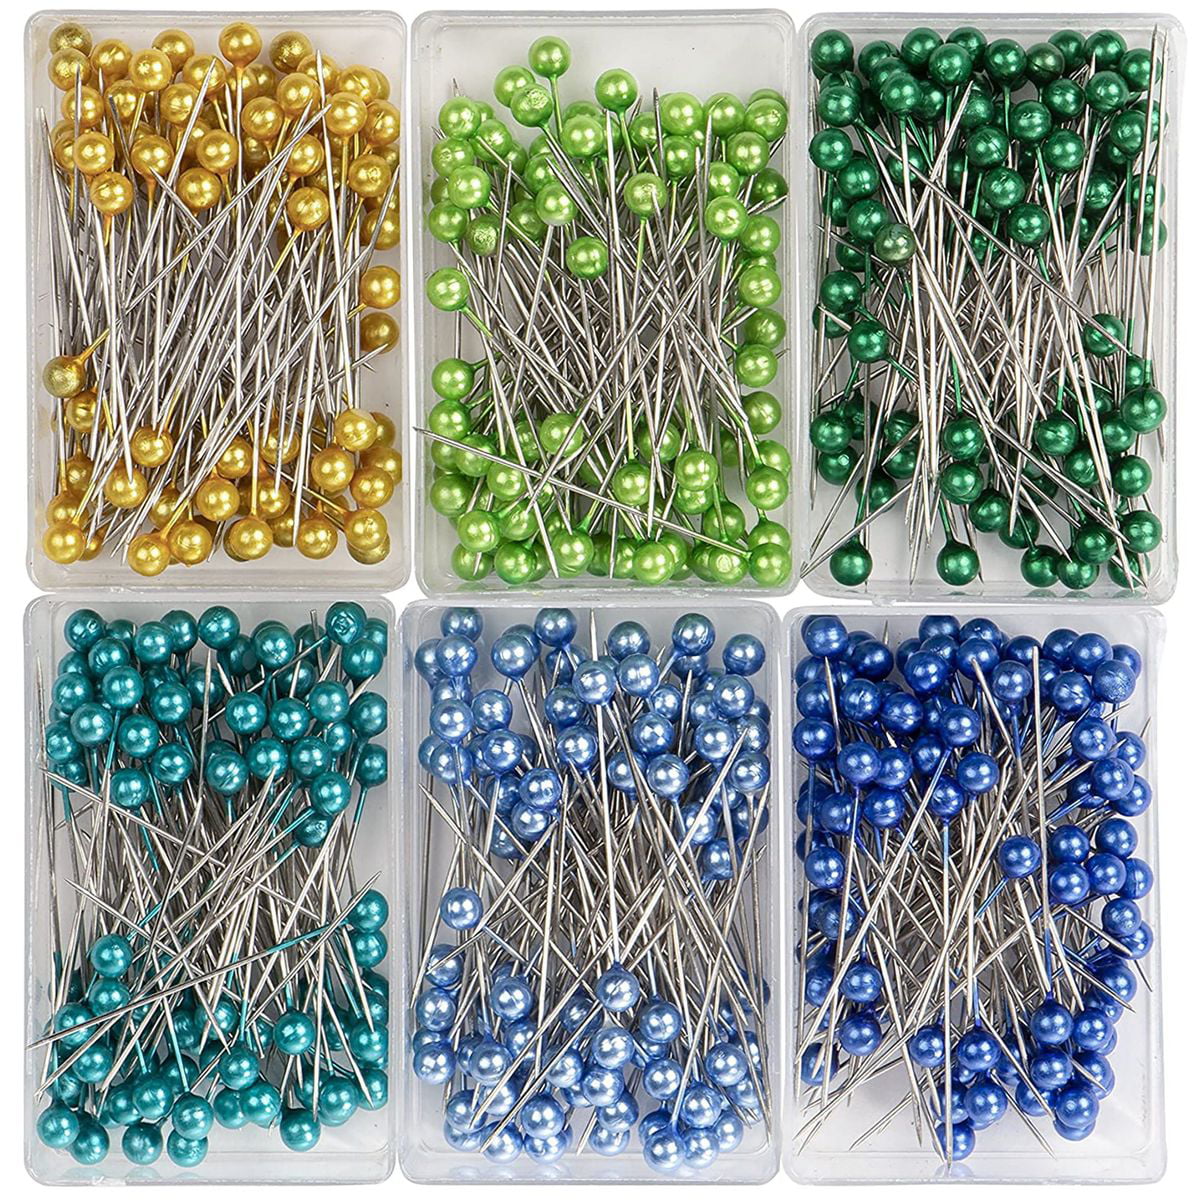 500 Pieces 38mm/1.5inch Sewing Pins with Colored Heads HUOLIKING Glass Ball Head Pins Straight Pins Multicolor with Plastic Box for Dressmaking Quilting Jewelry Decoration 